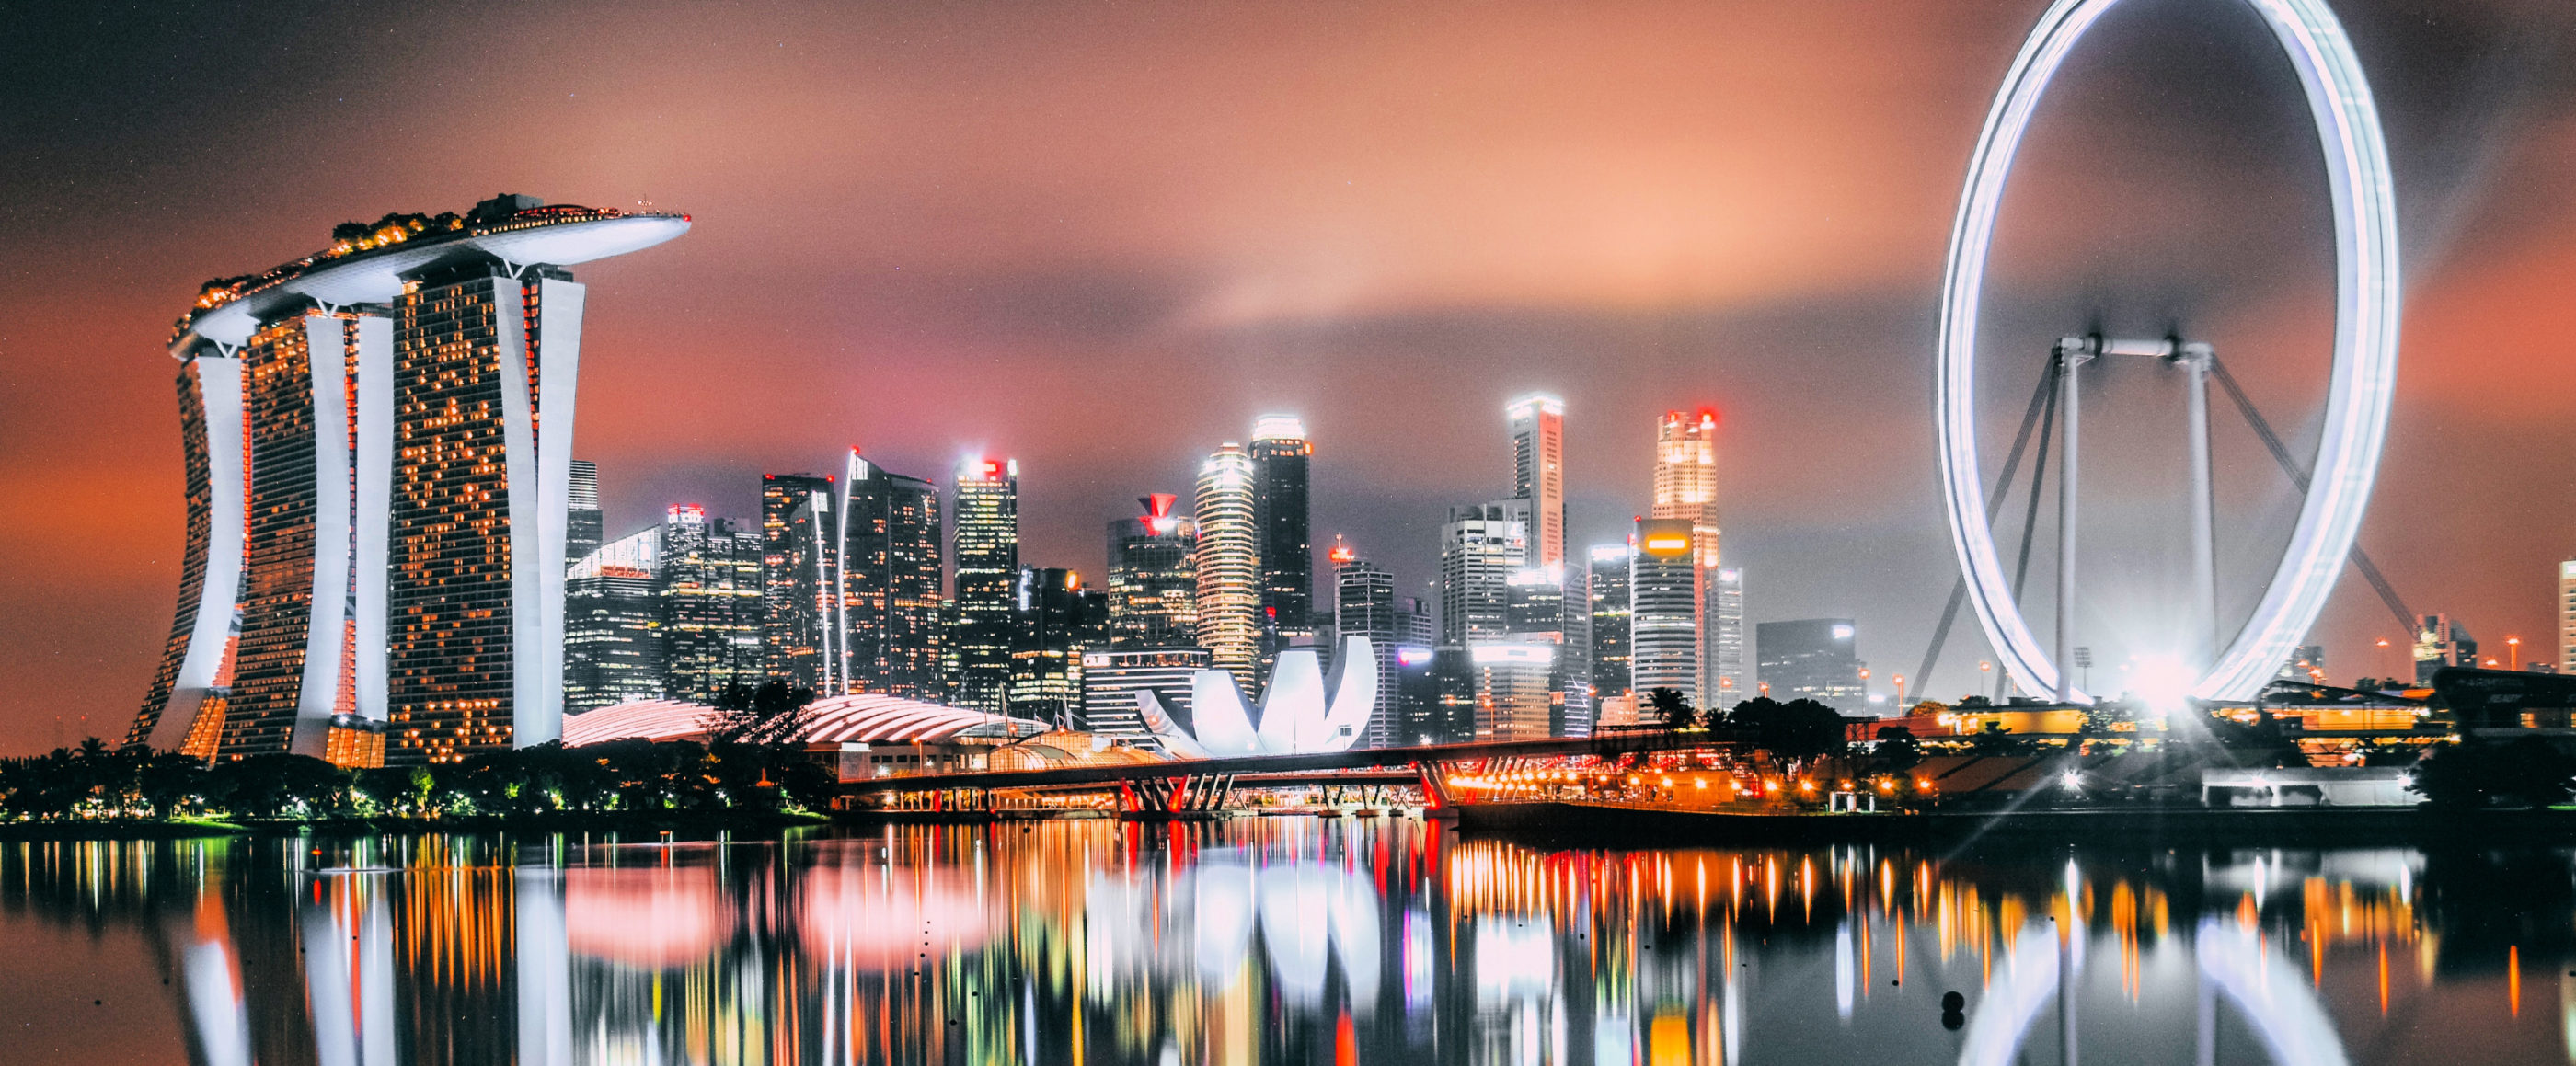 10 Best Things To Do In Singapore